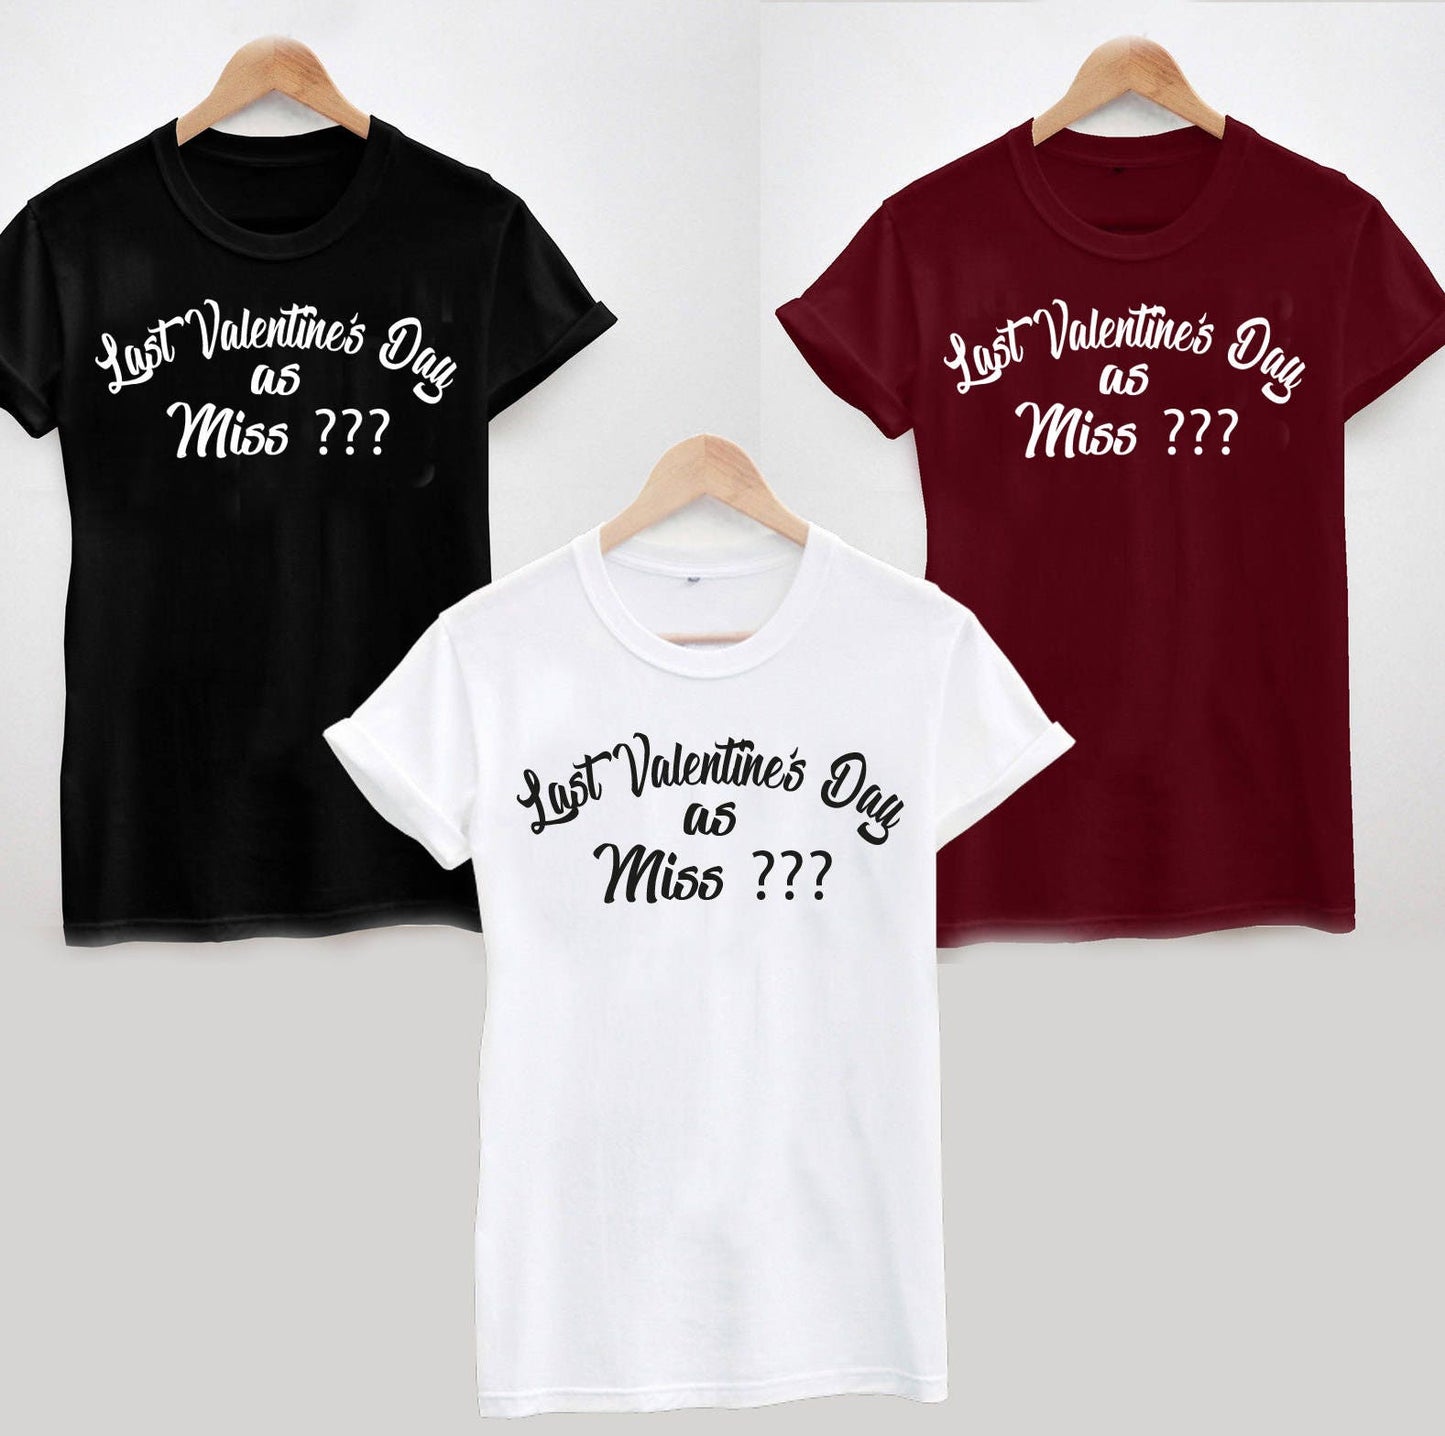 Last Valentine's Day as Miss (Any Name) Personalised T-Shirt, Ladies, Unisex